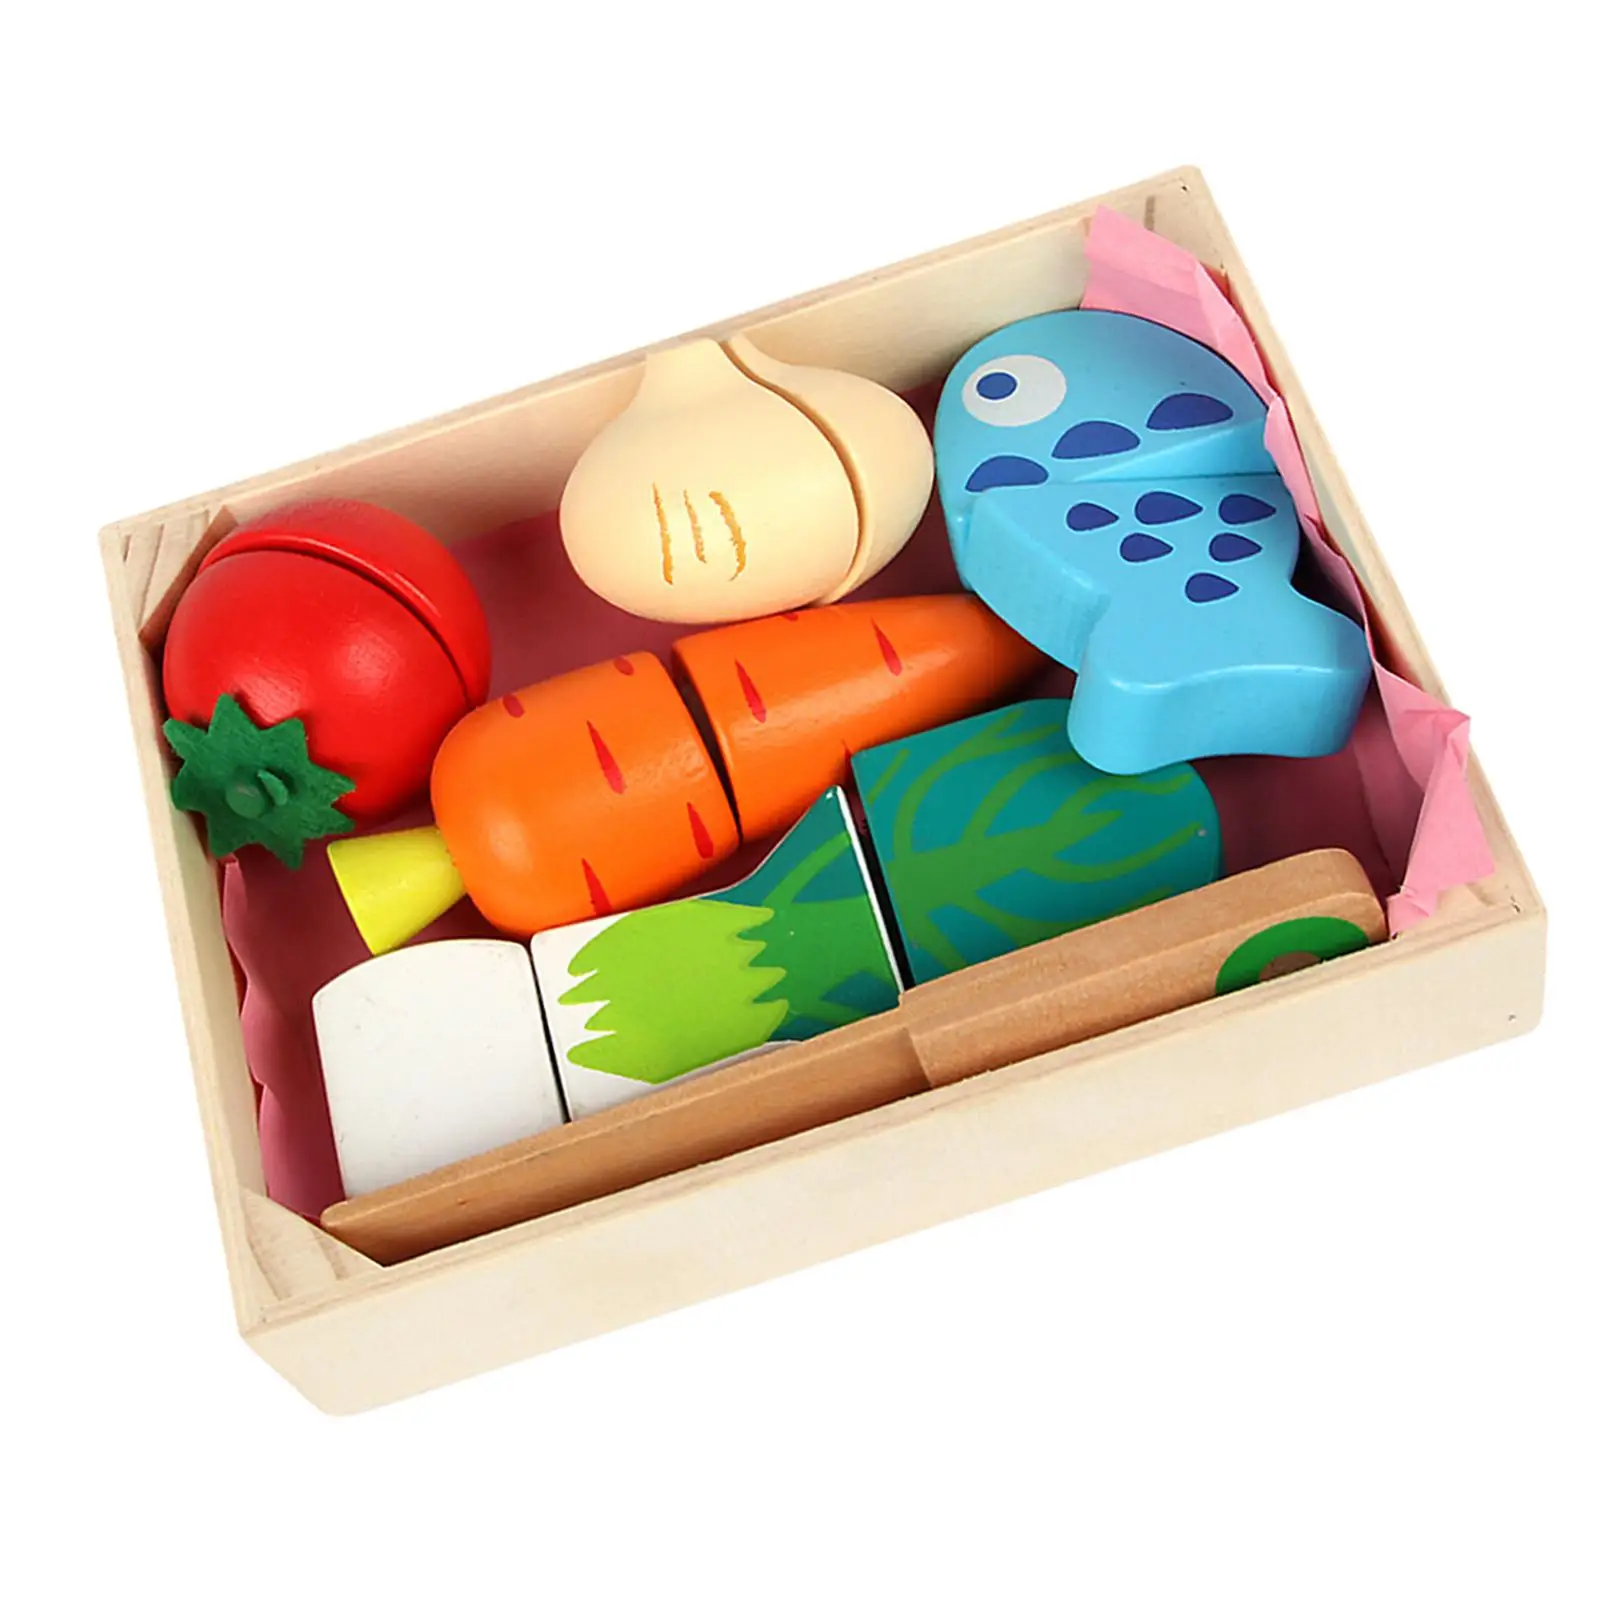 Food Pretend Playset Hands On Ability Pretend Role Play for Holiday Gifts